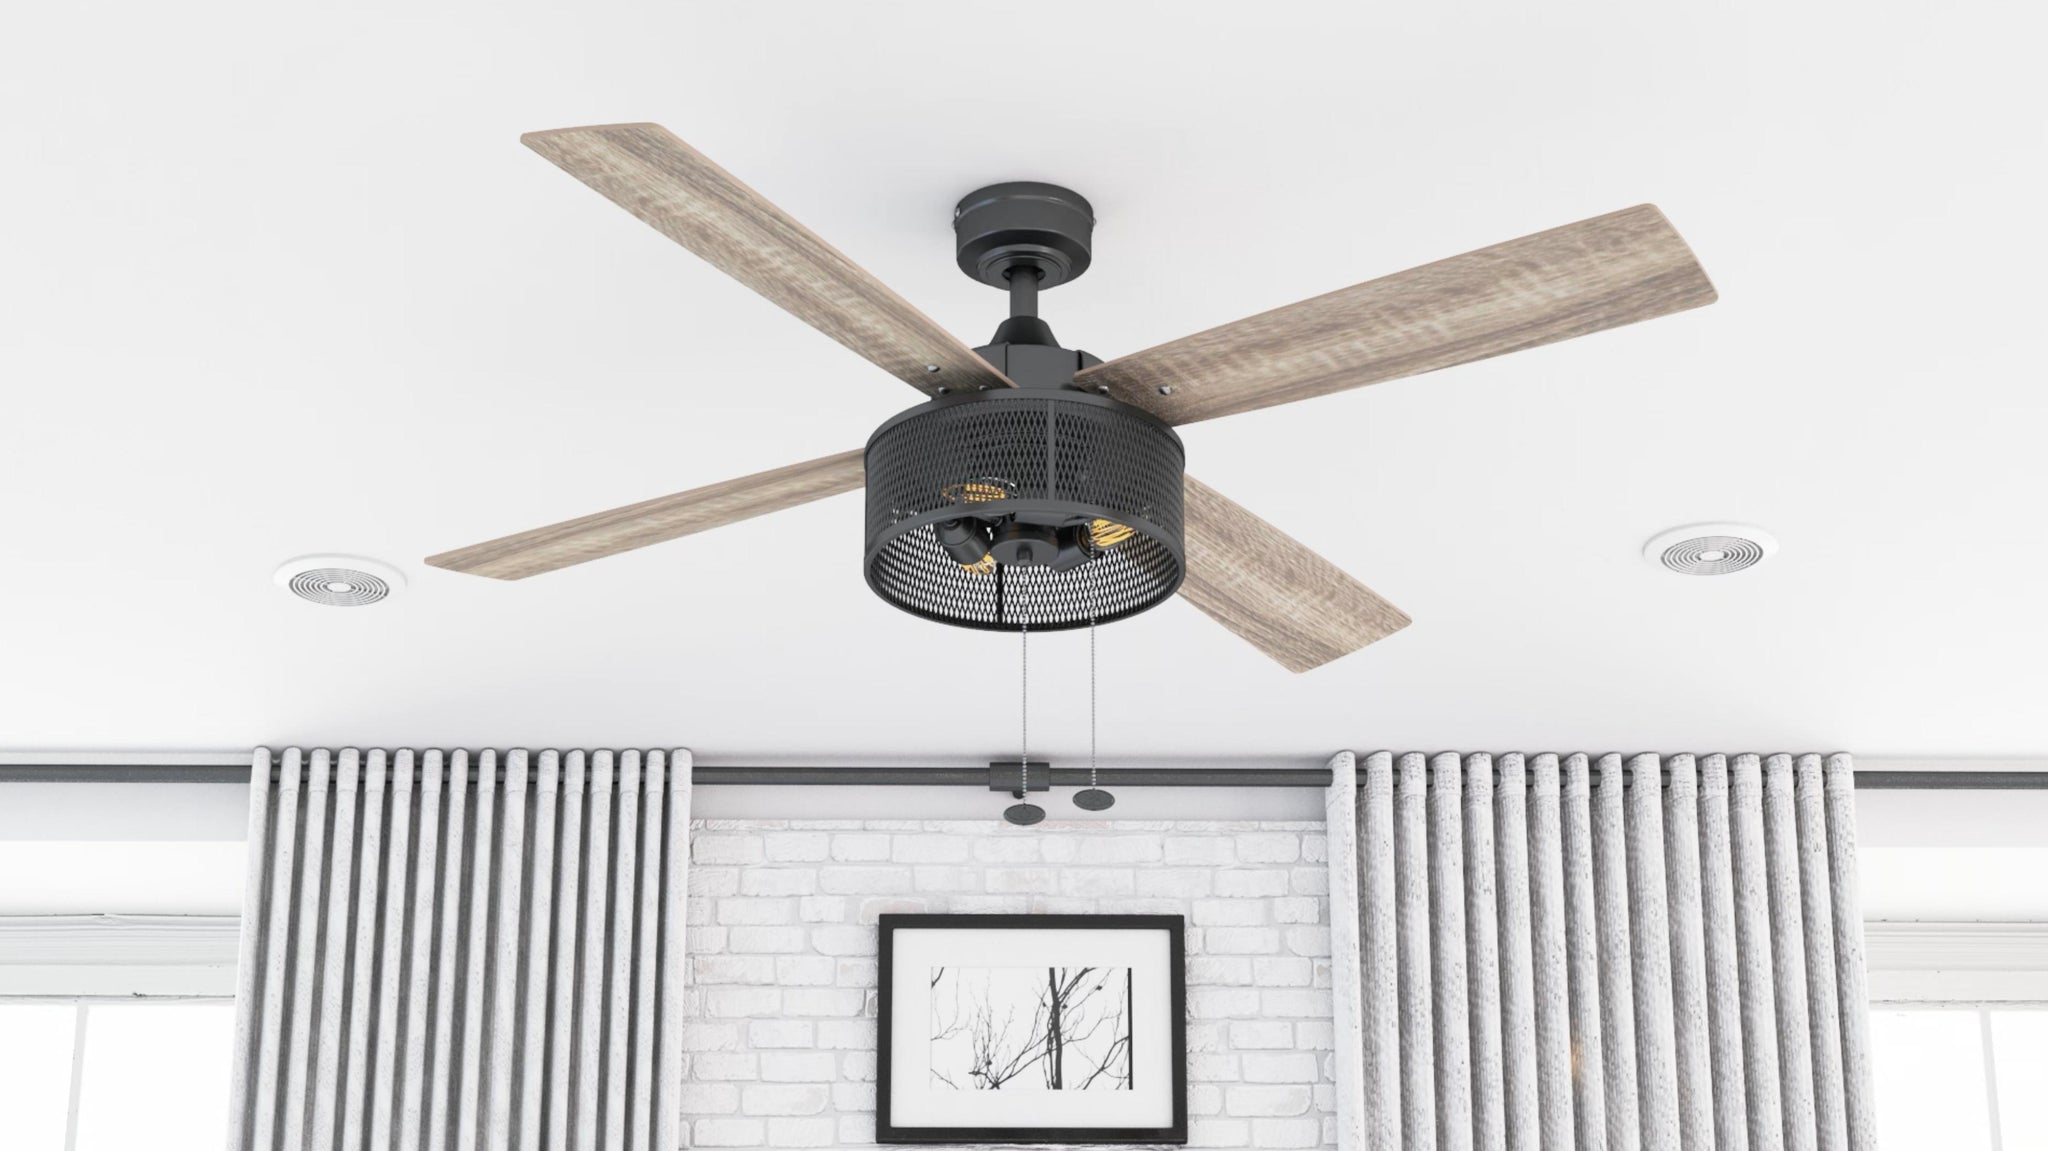 52 Inch Mandino, Matte Black, Pull Chain, Ceiling Fan by Prominence Home